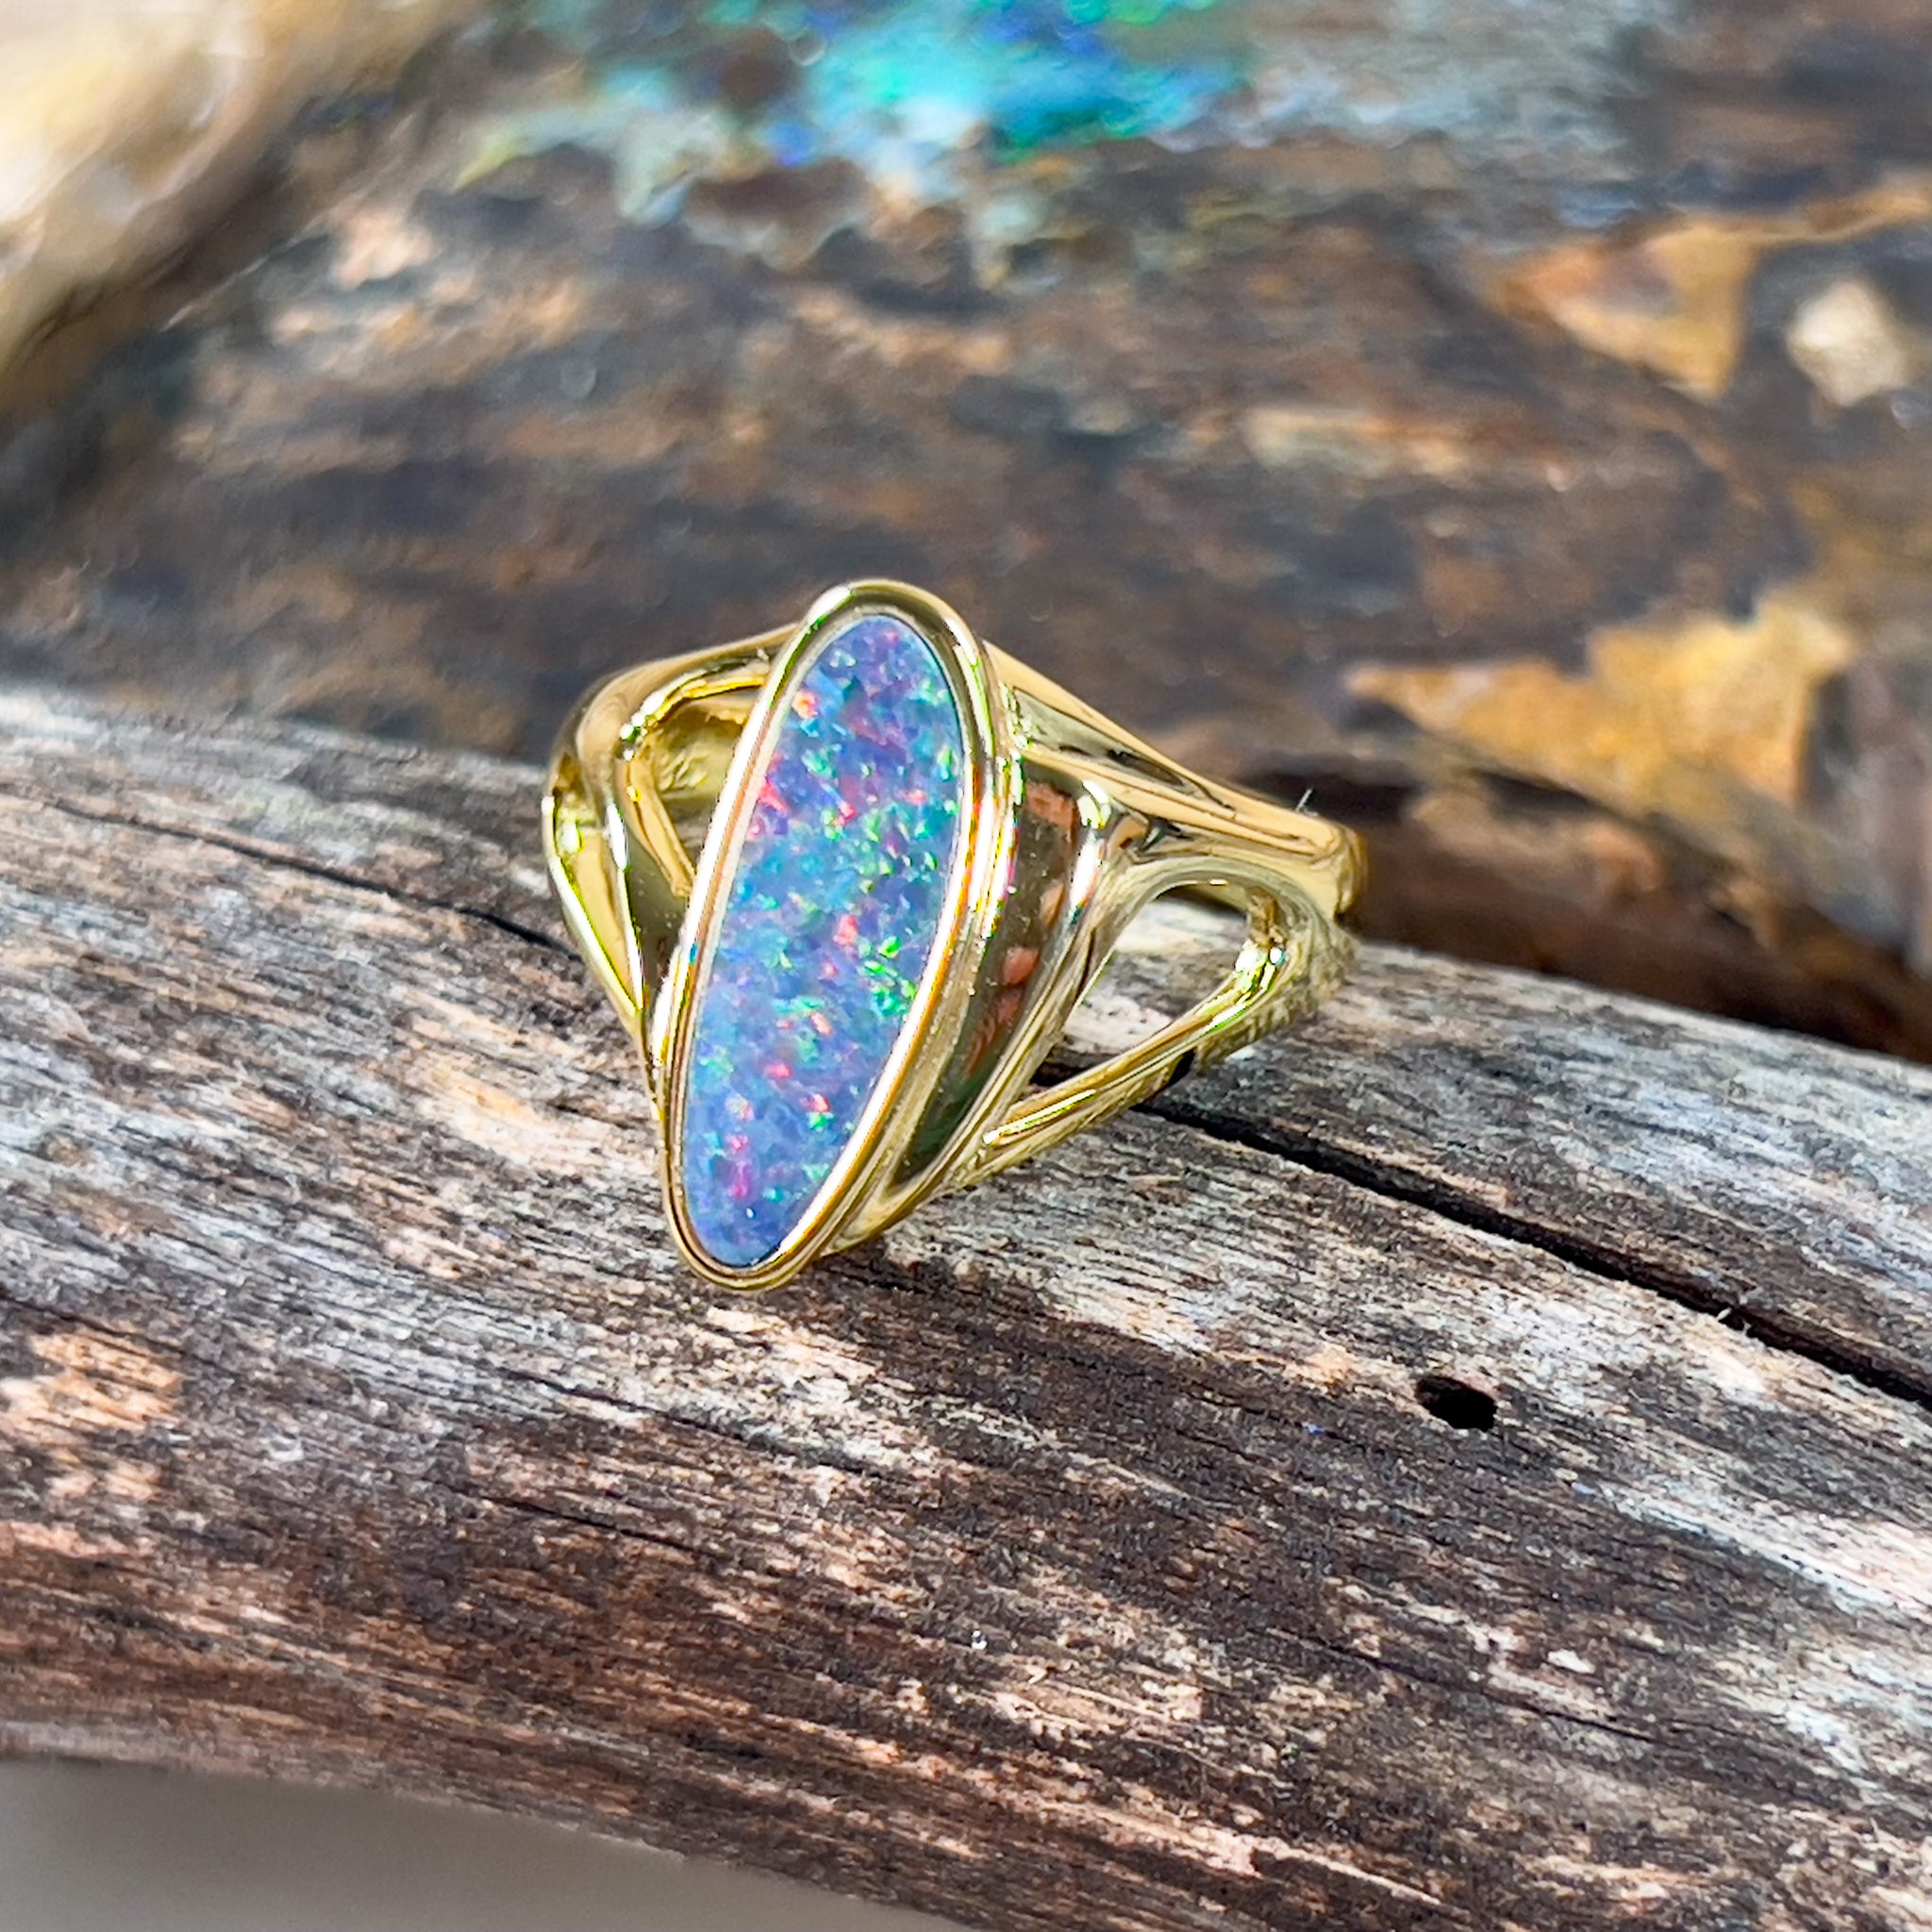 Sterling Silver Gold plated cut out patterned Opal doublet ring - Masterpiece Jewellery Opal & Gems Sydney Australia | Online Shop